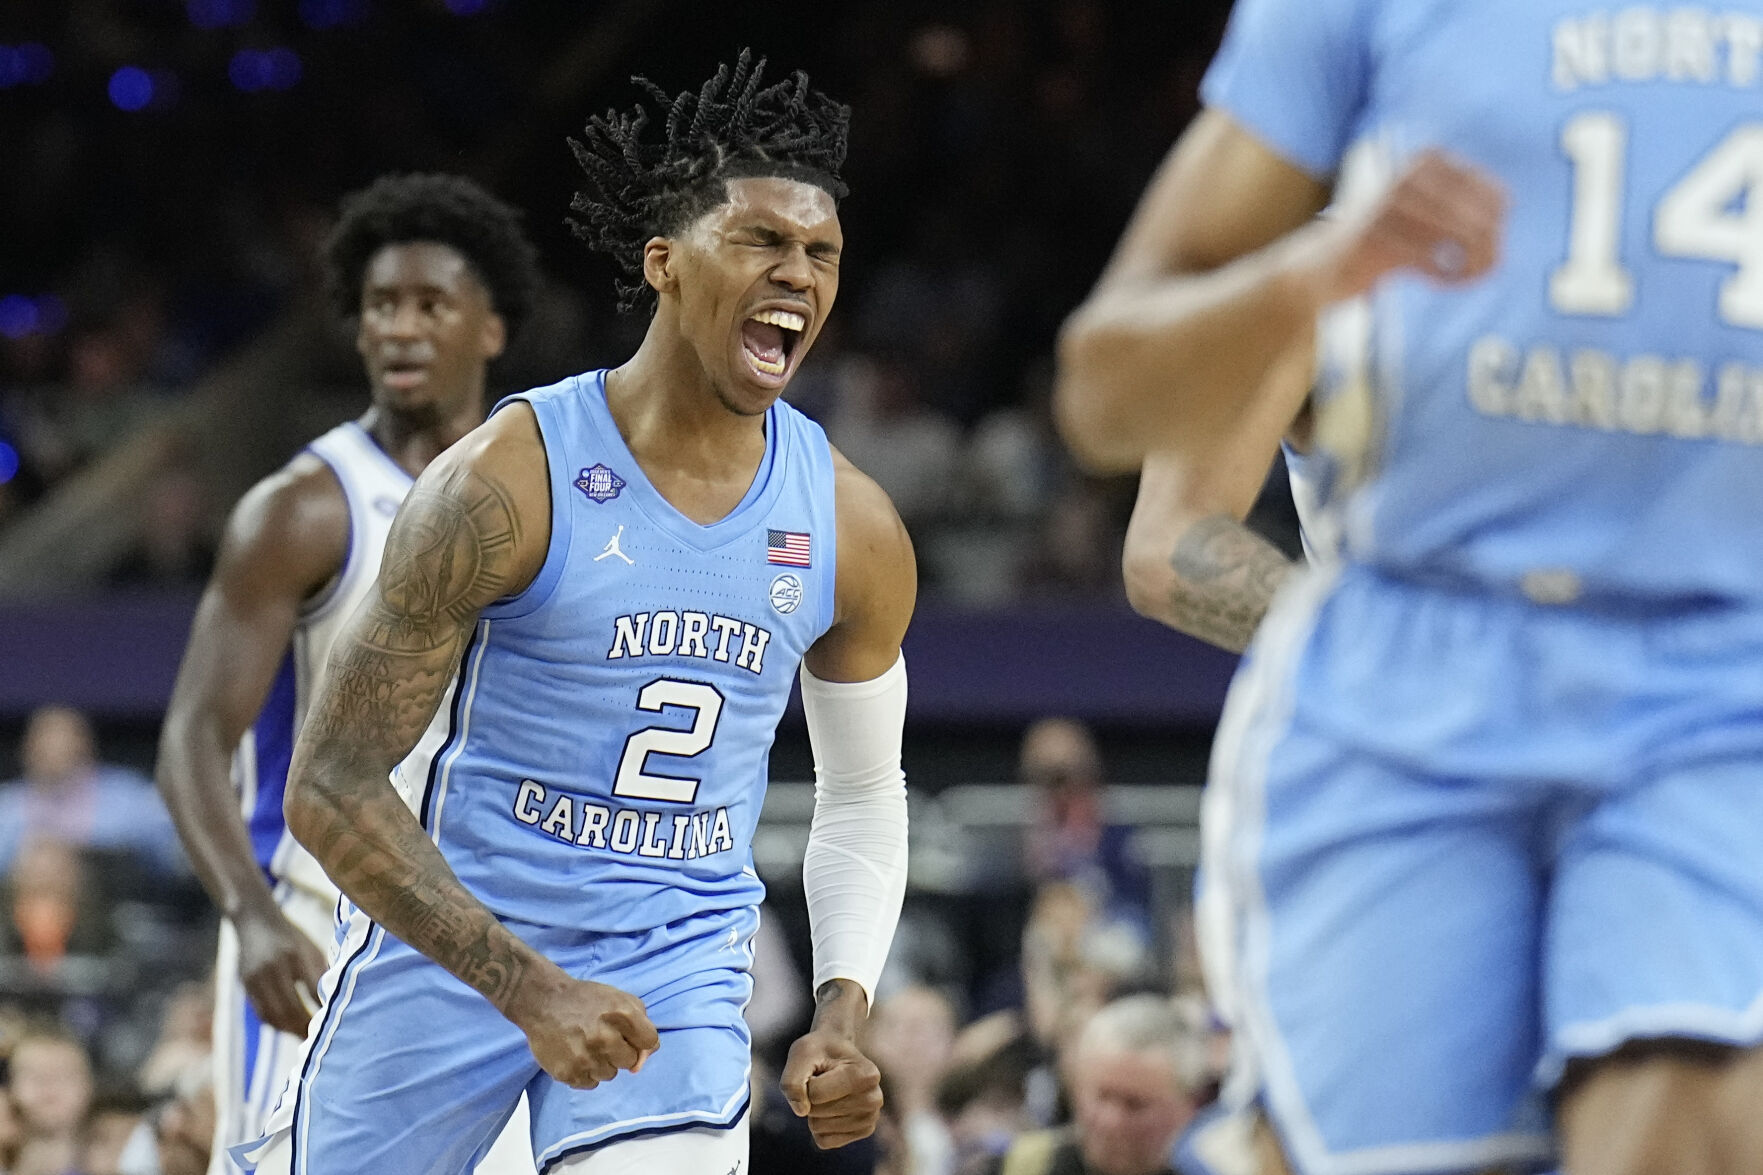 North Carolinas Caleb Love, from CBC, says he plans to enter NCAA transfer portal